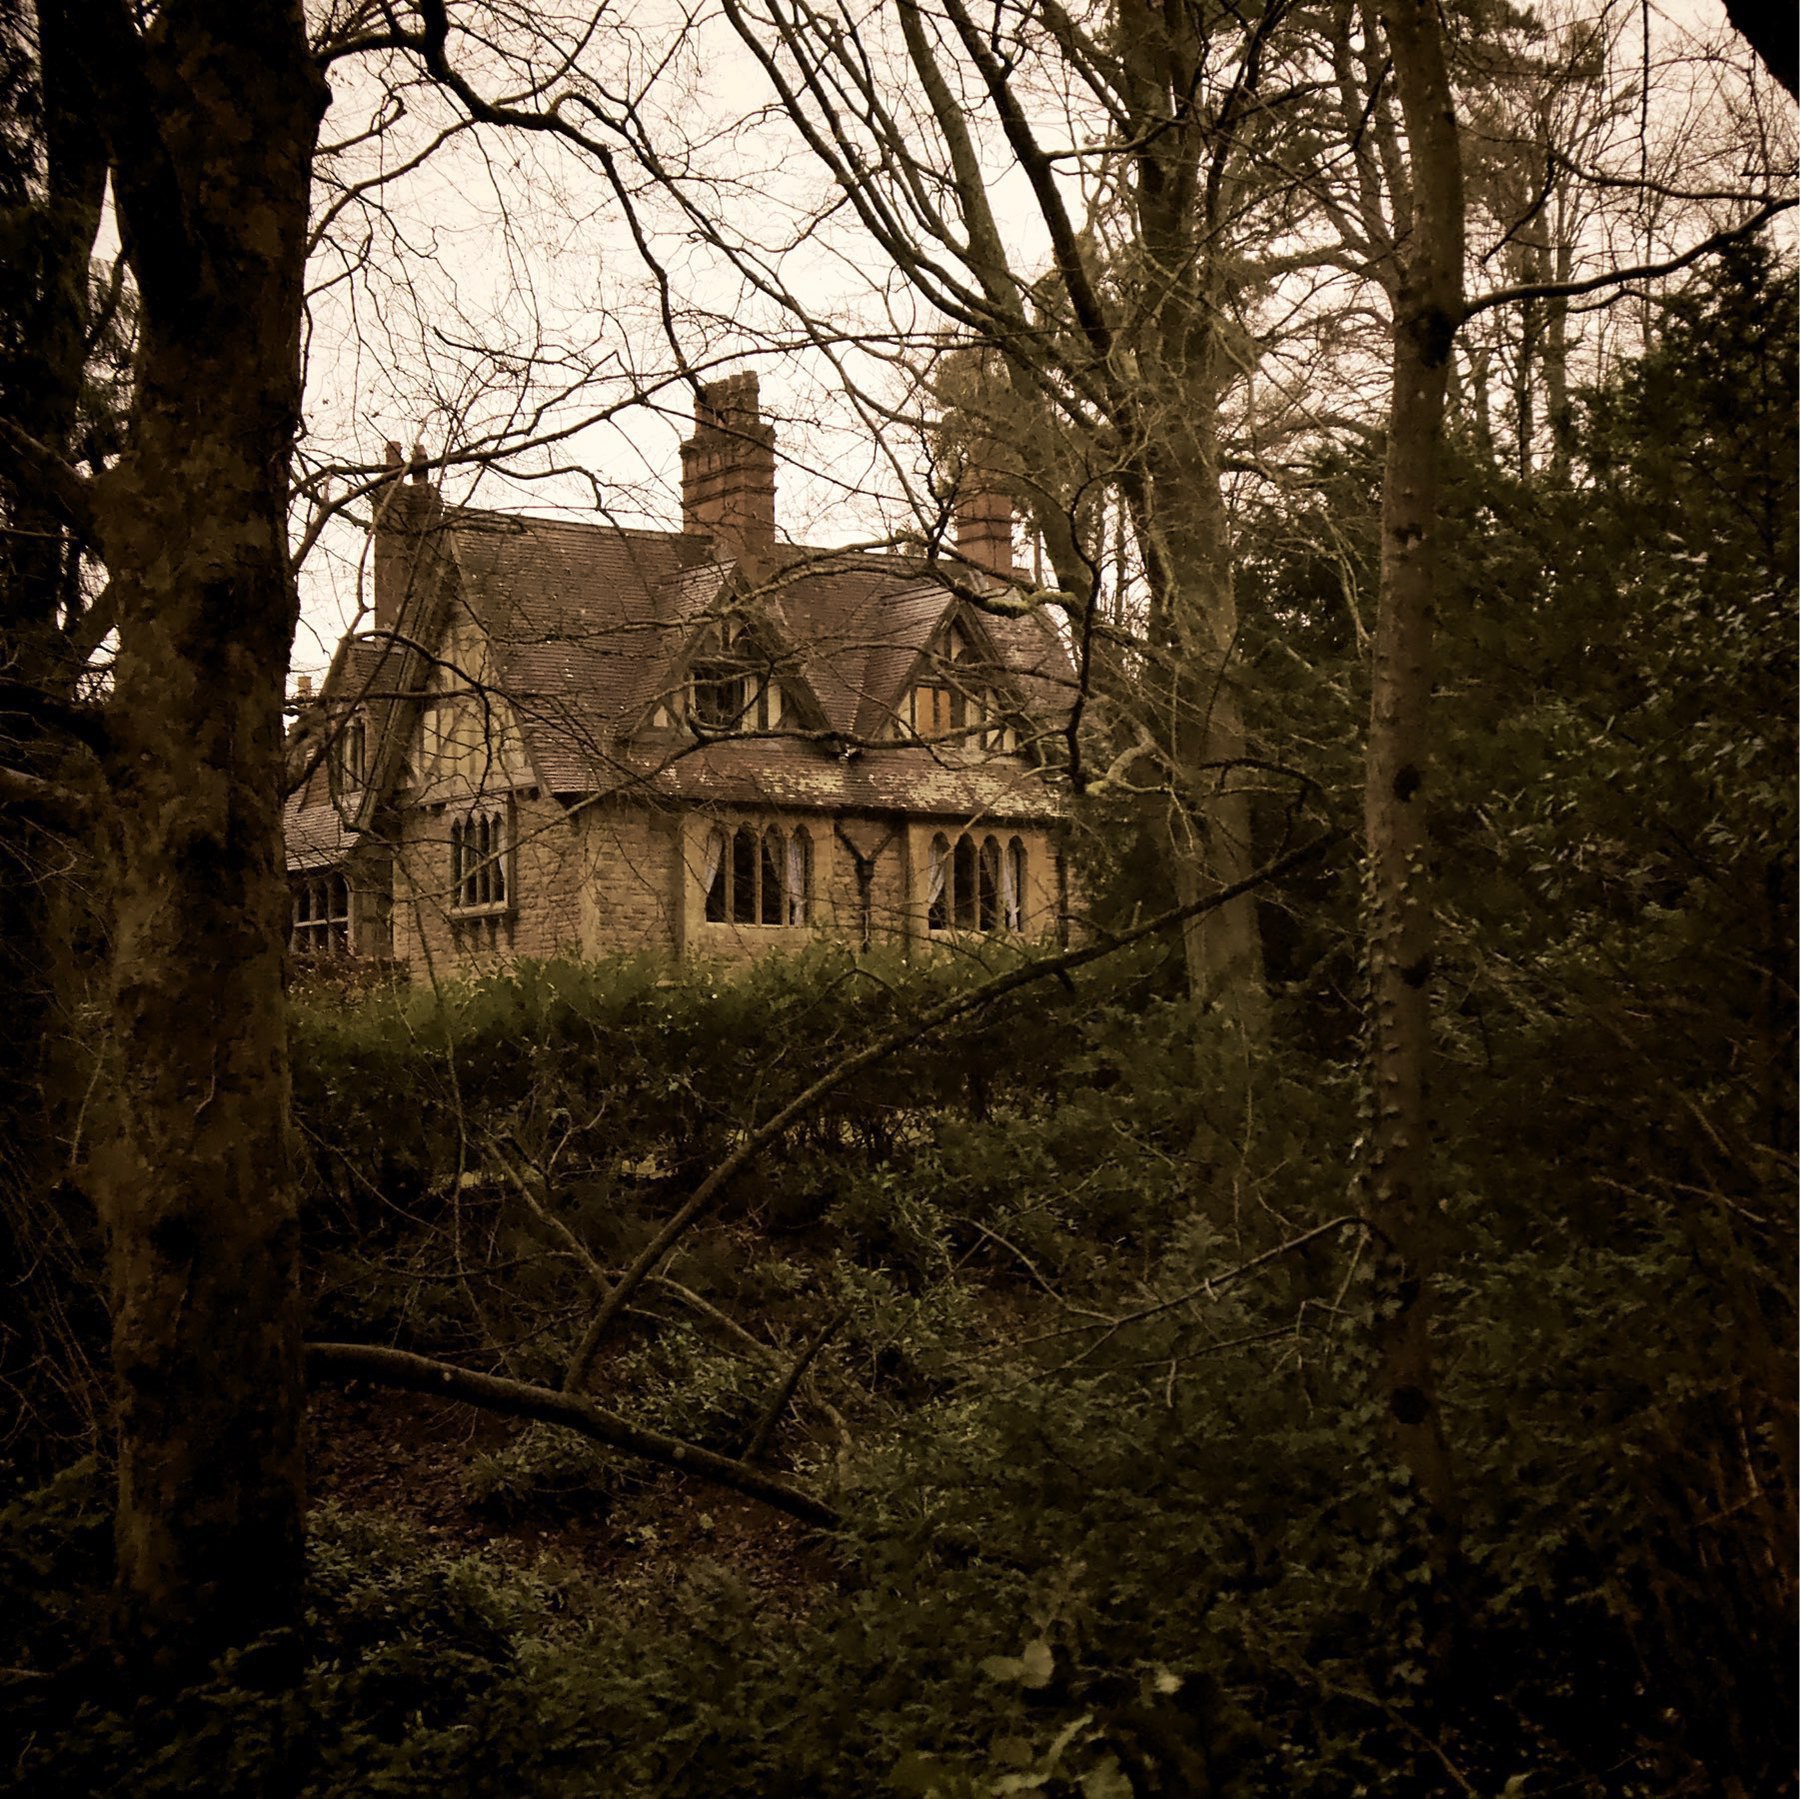 A house in the woods on the Tyntsfield estate